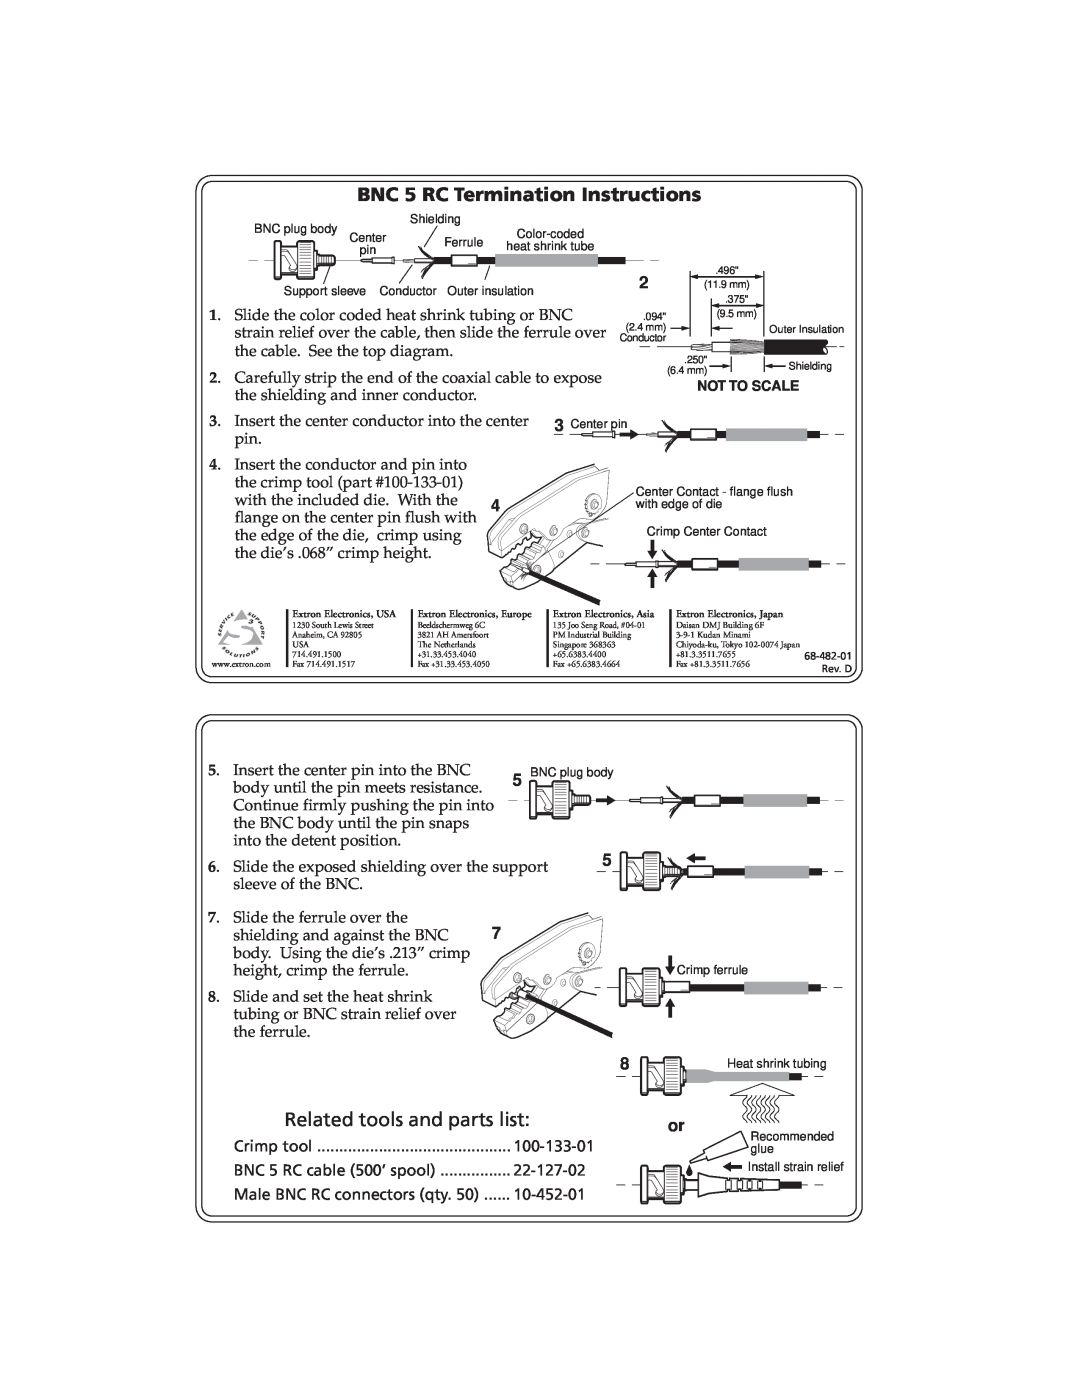 Extron electronic manual BNC 5 RC Termination Instructions, Related tools and parts list, Crimp tool, 22-127-02 